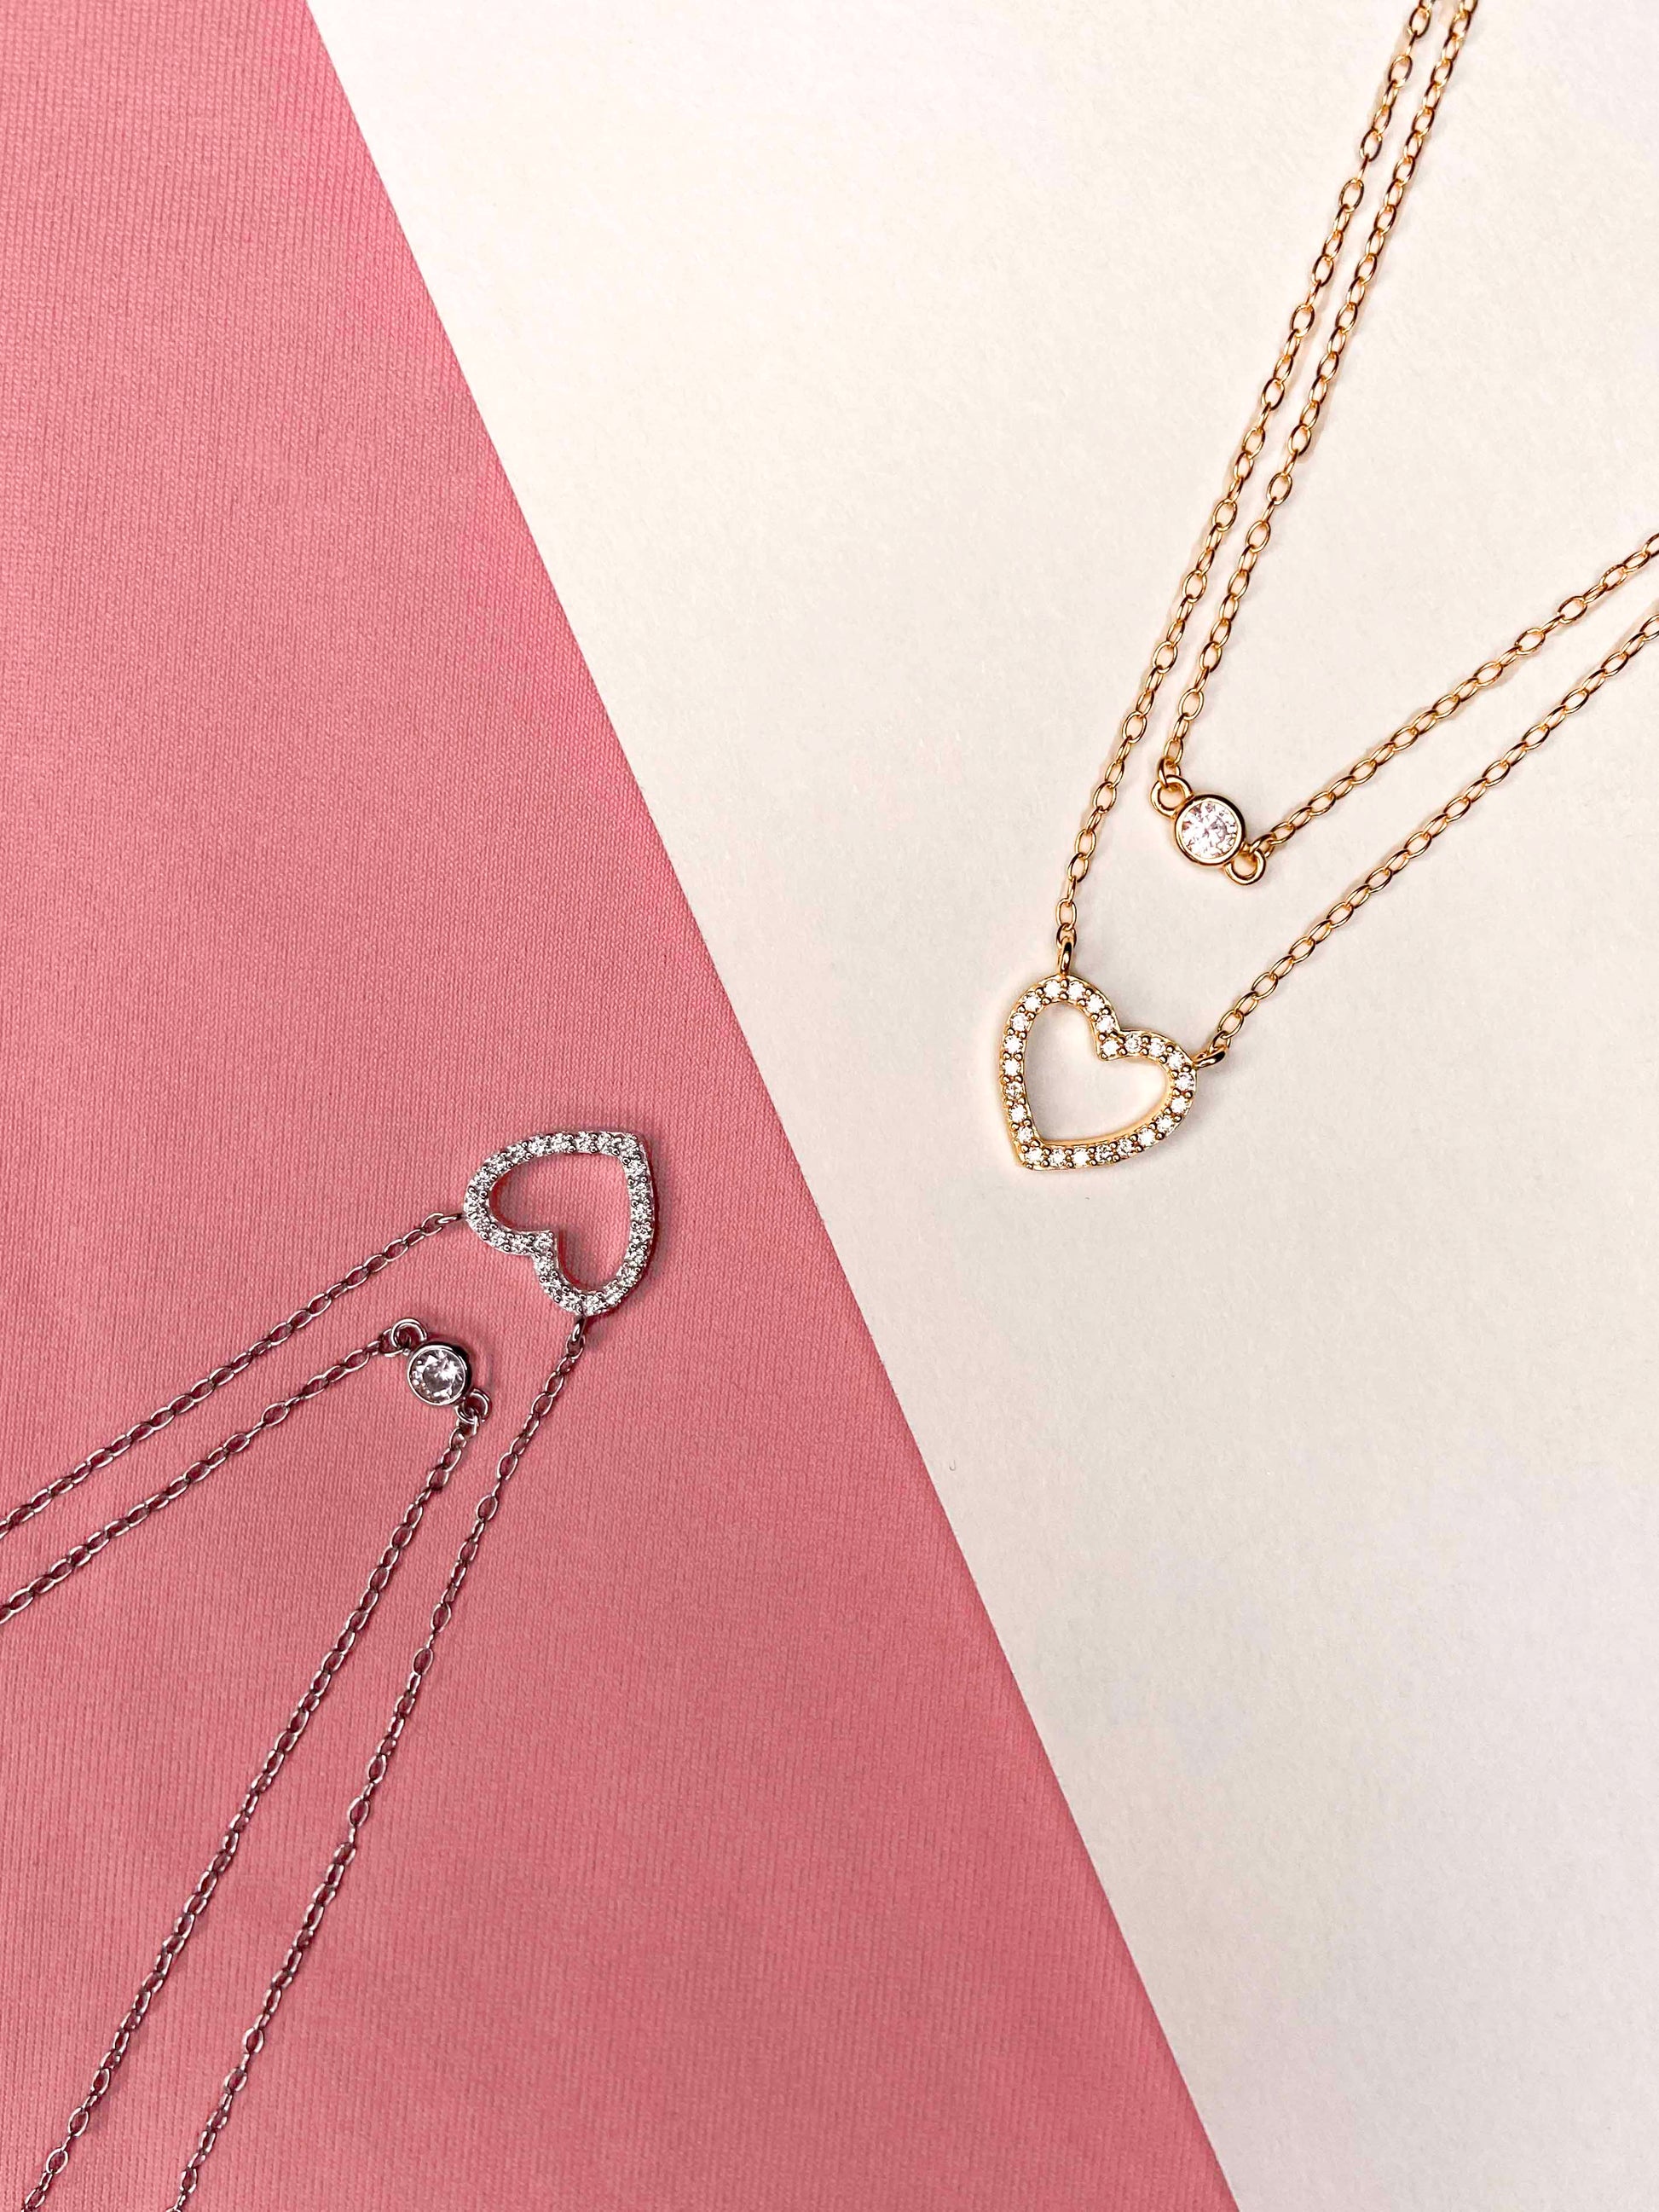 925 sterling silver and gold-plated sterling silver double-layer necklace delicate clavicle chain zircon necklace.